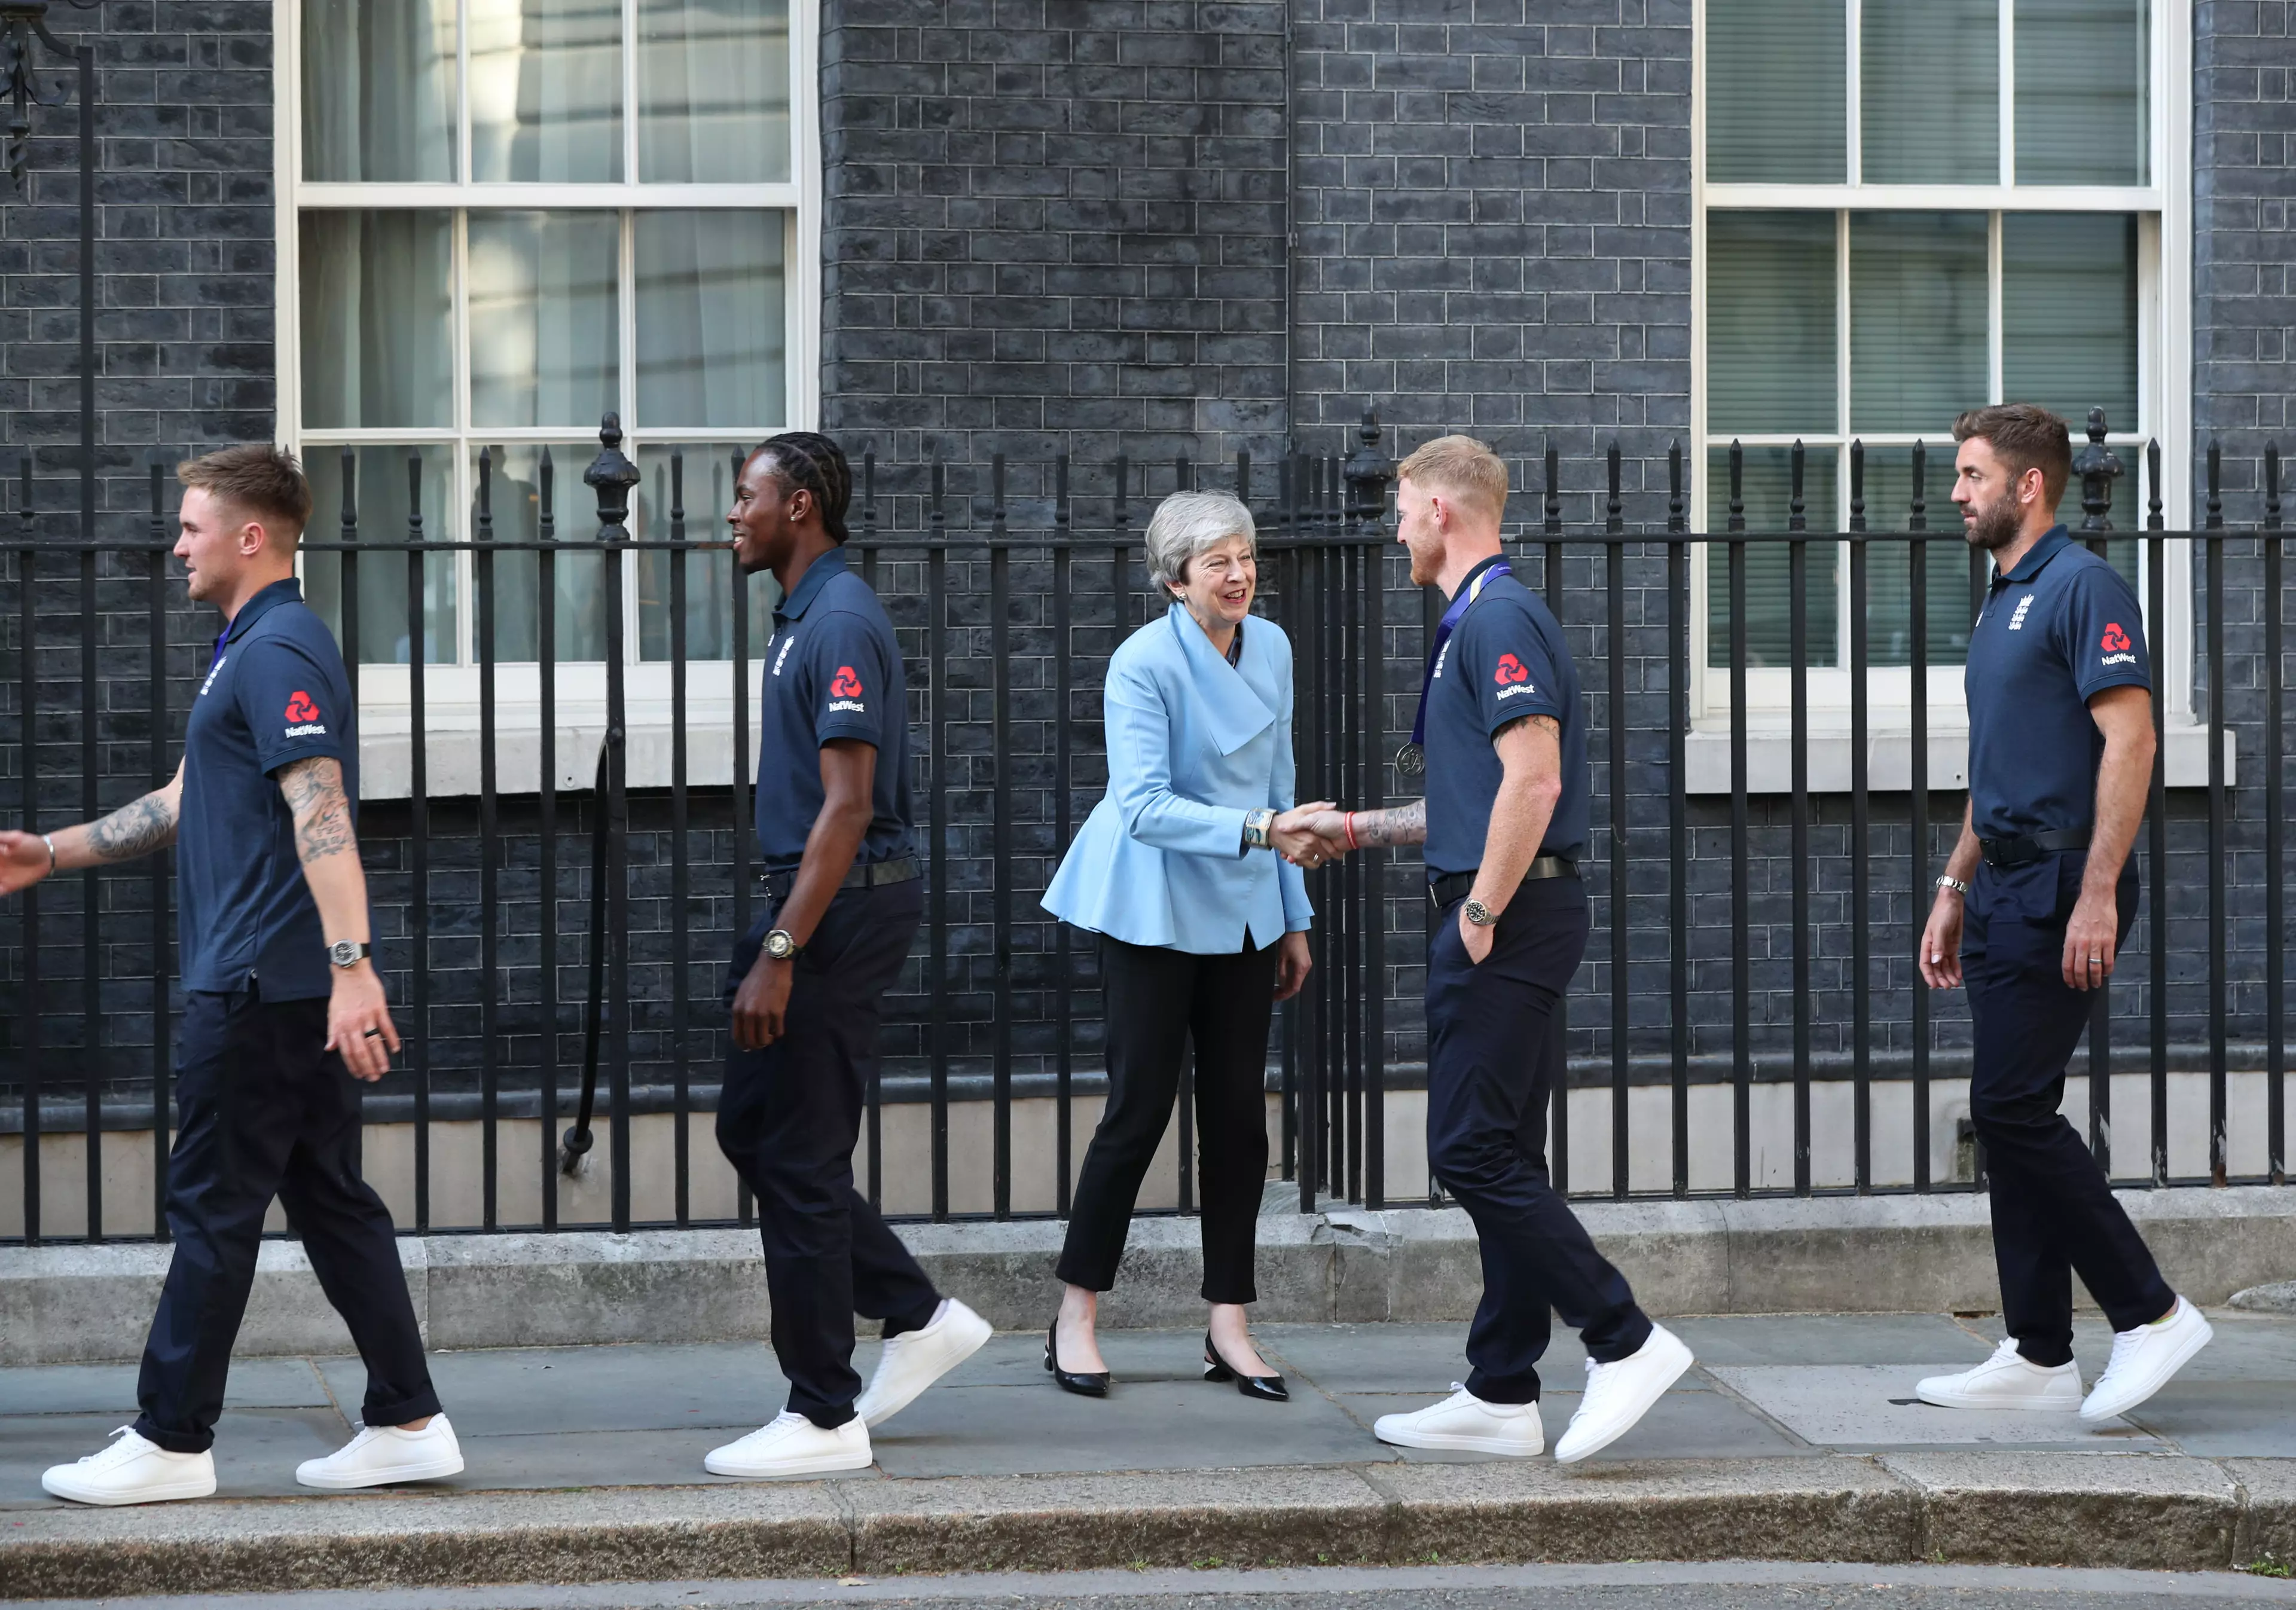 Stokes meets outgoing Prime Minister Theresa May at 10 Downing Street. Image: PA Images